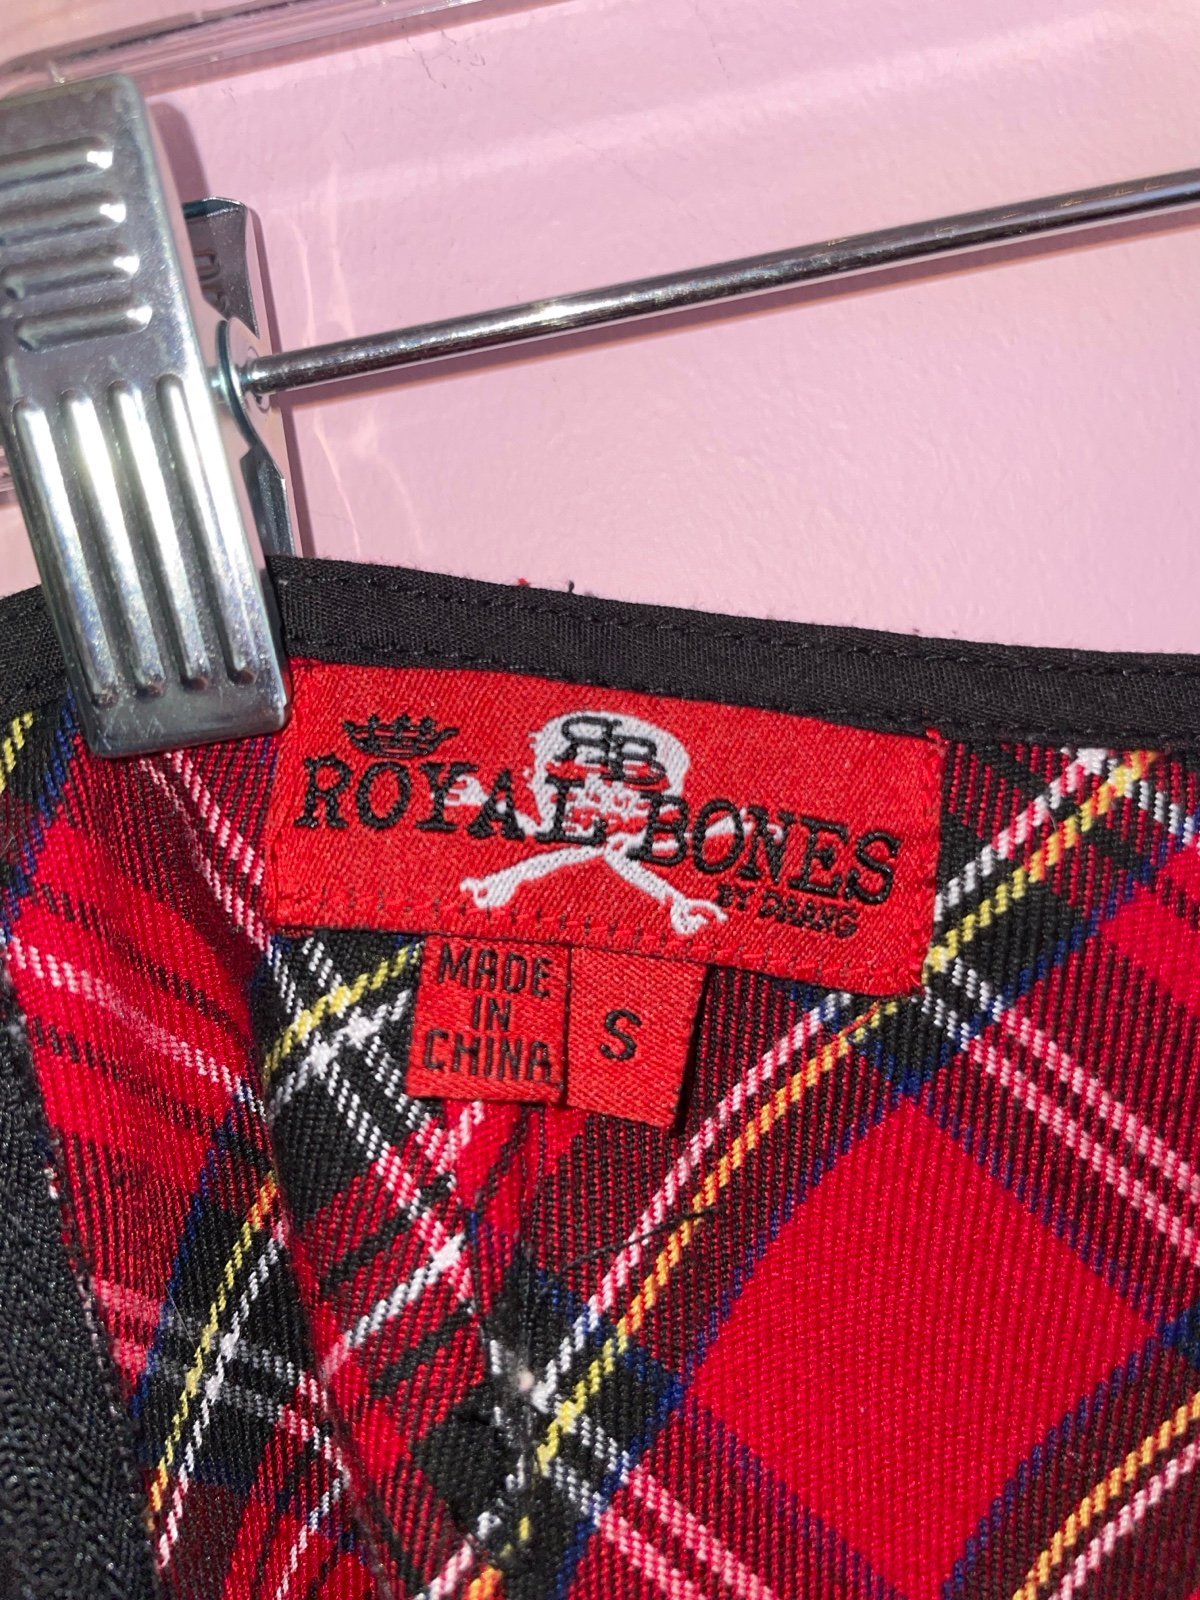 Personality Royal Bones Red Plaid Skirt I06o5NFoD Online Exclusive